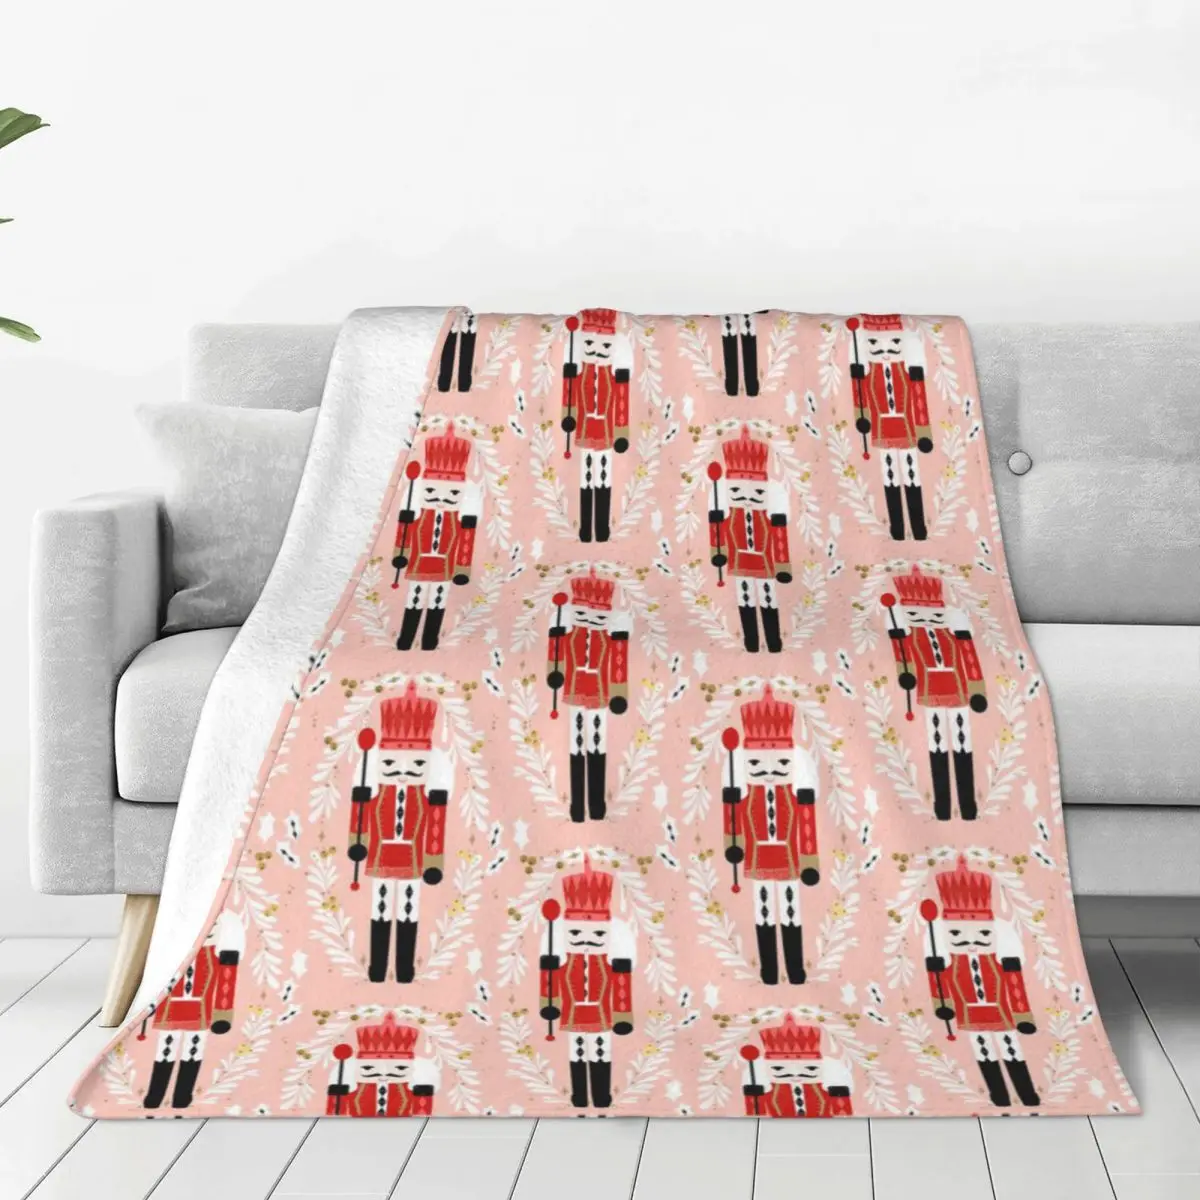 Pink Nutcracker Soft Flannel Throw Blanket for Couch Bed Warm